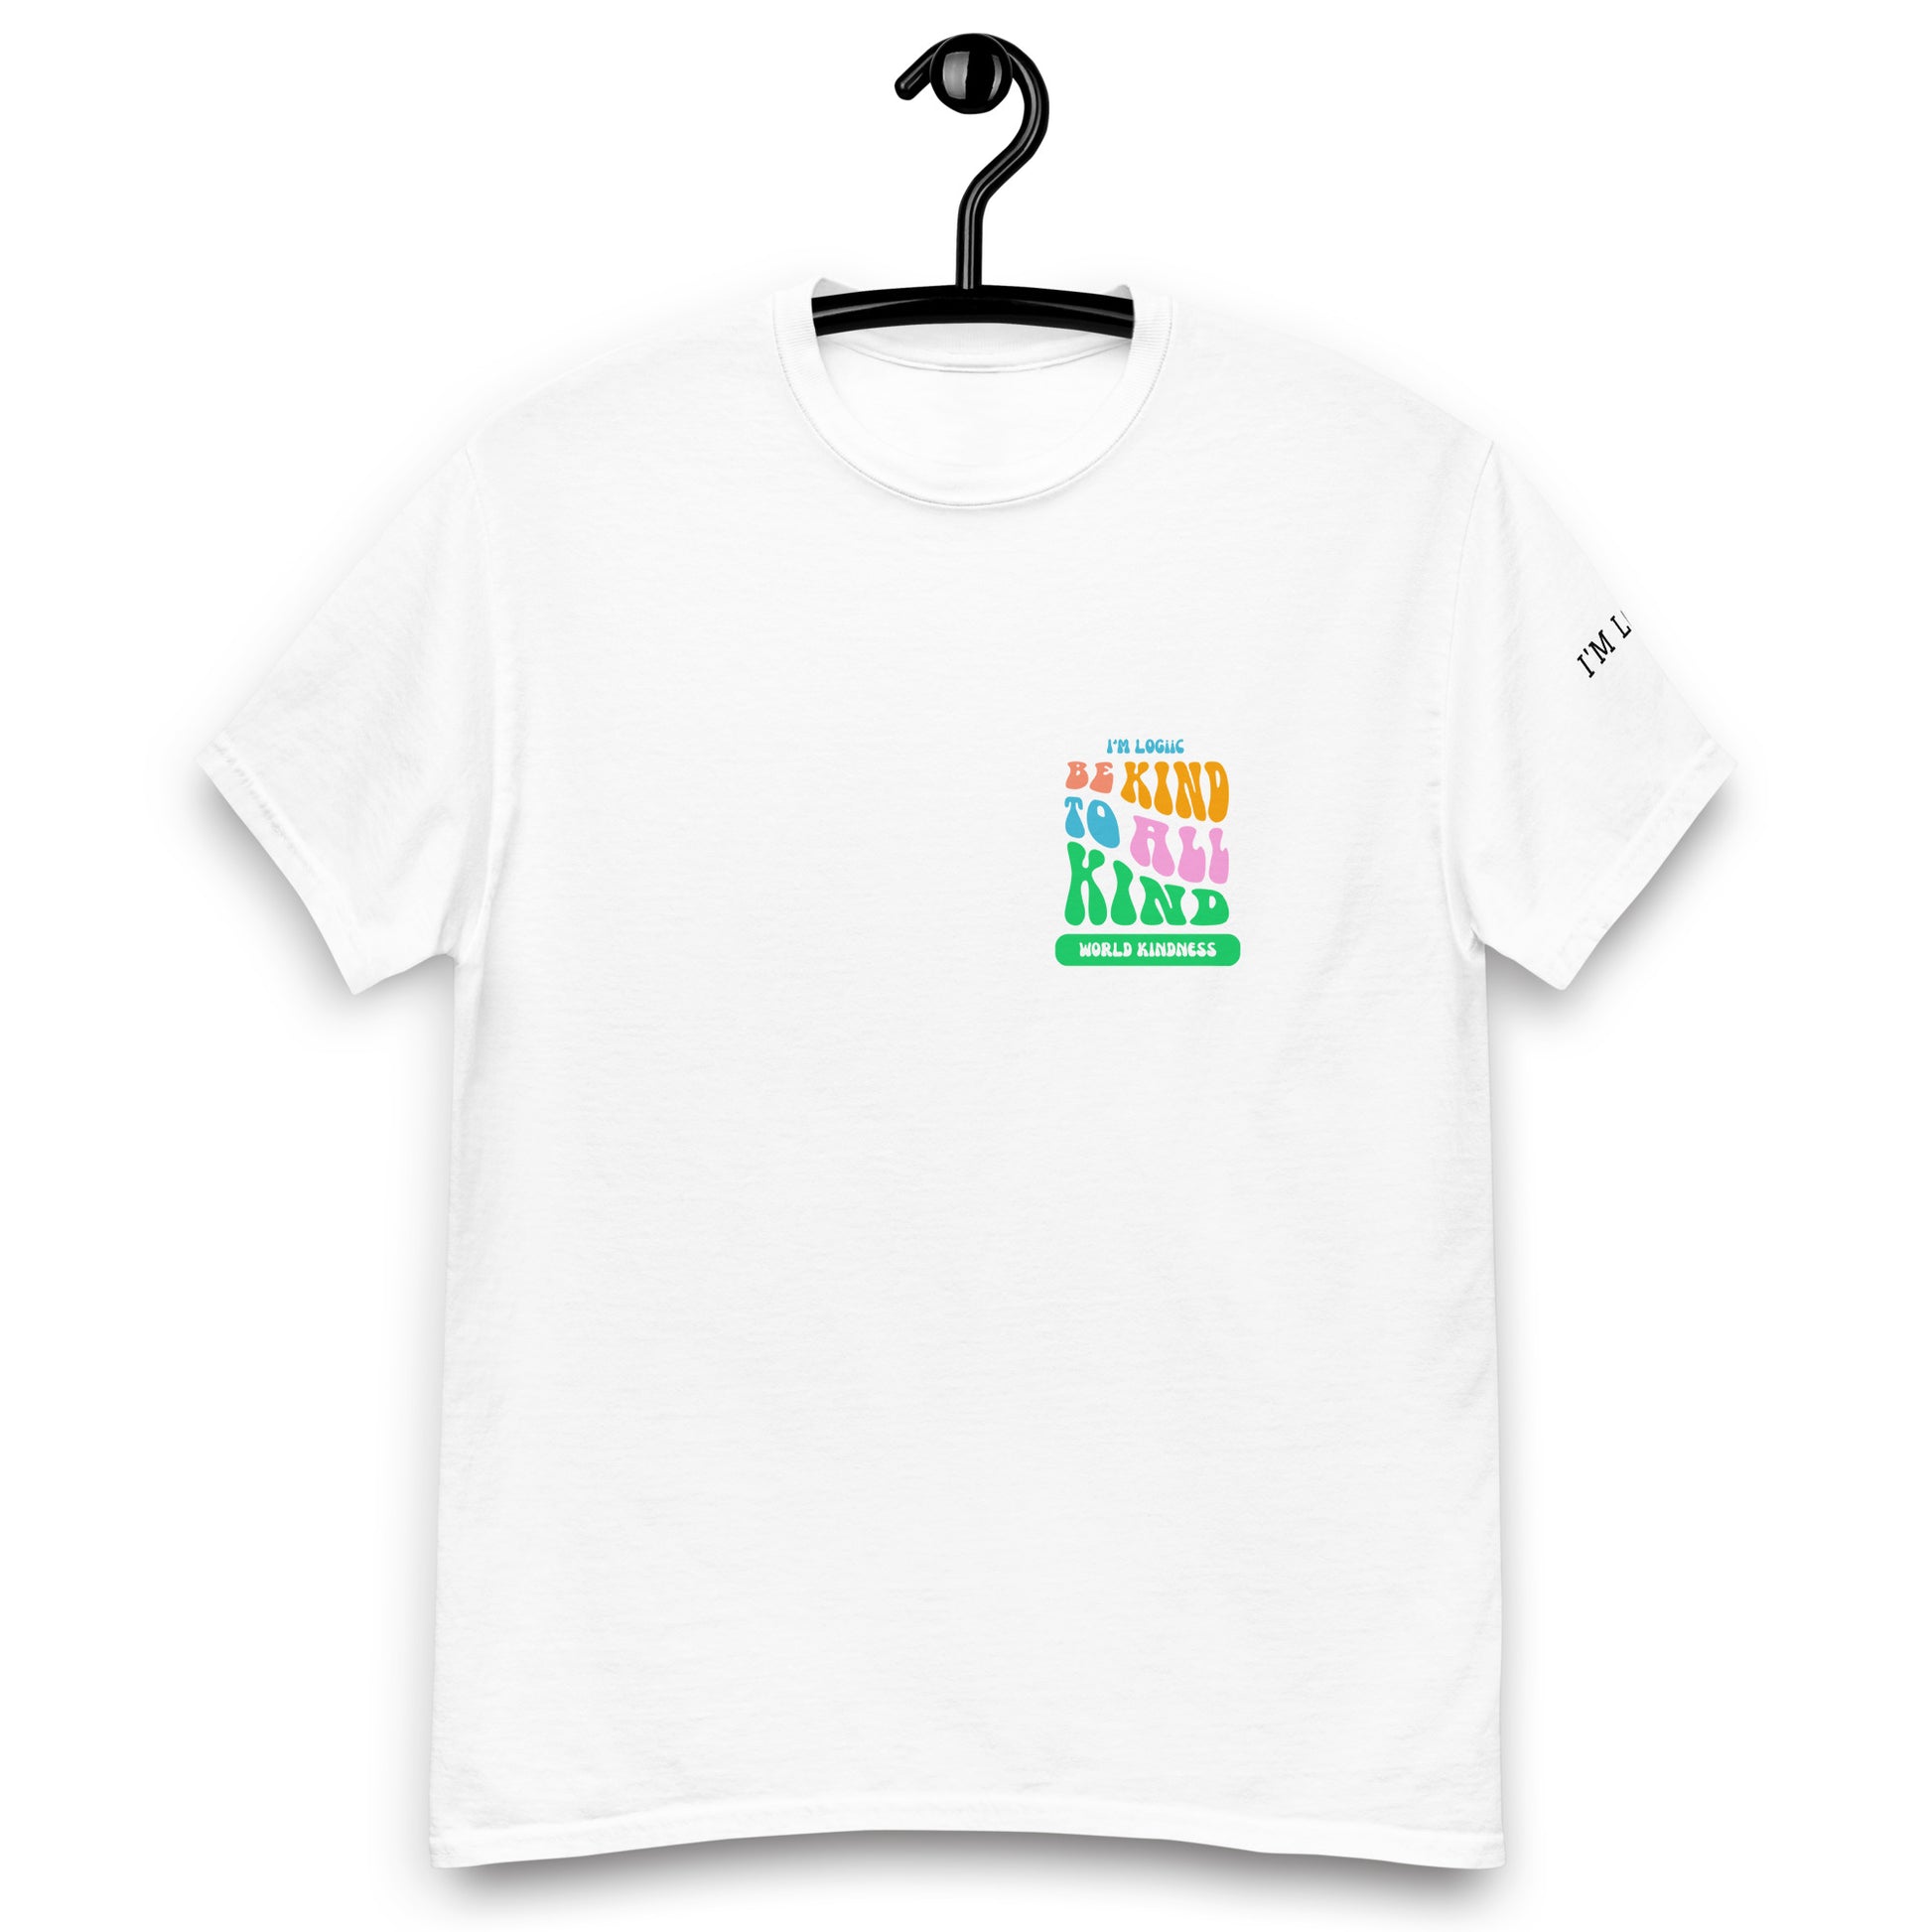 Be Kind classic tee - White / S